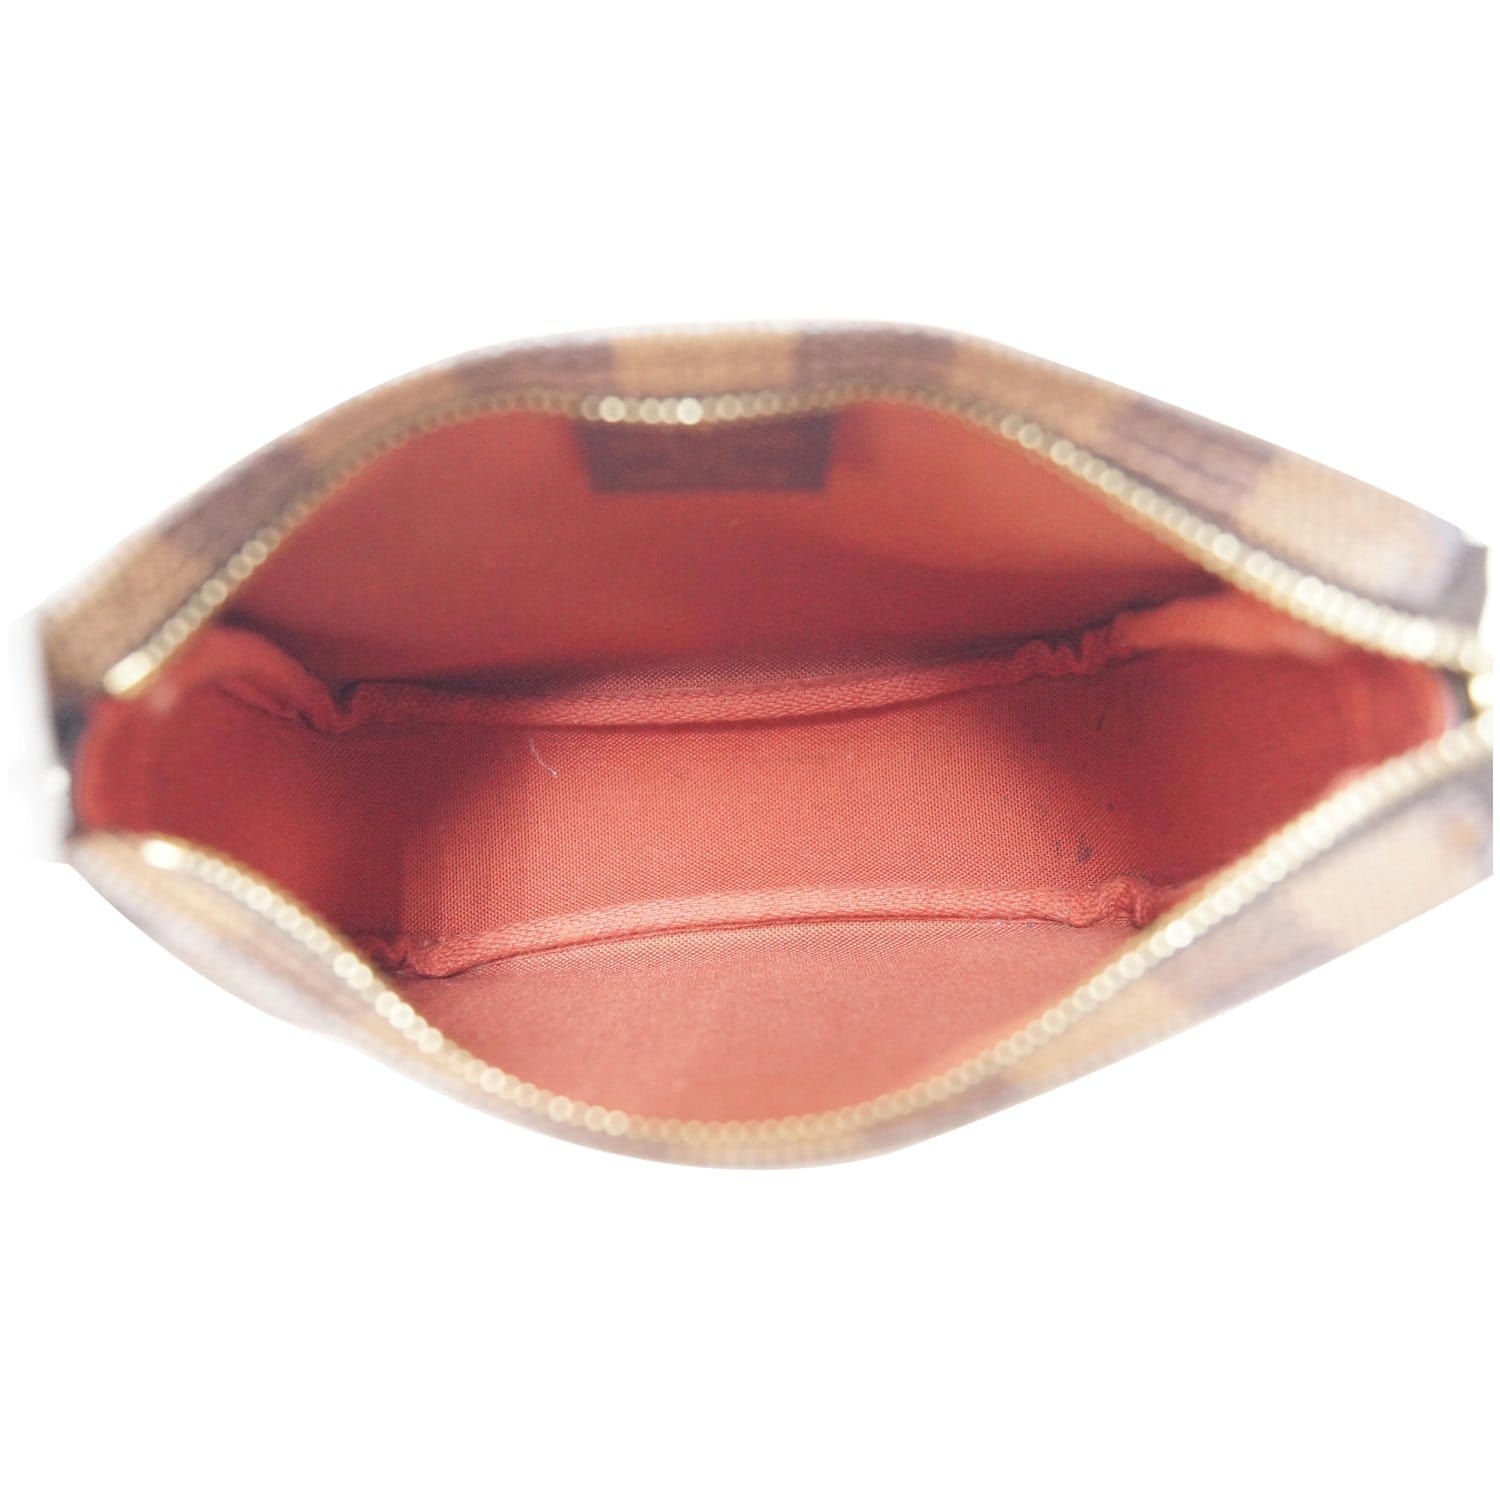 USED LOUIS VUITTON truth makeup N51892 Pouch